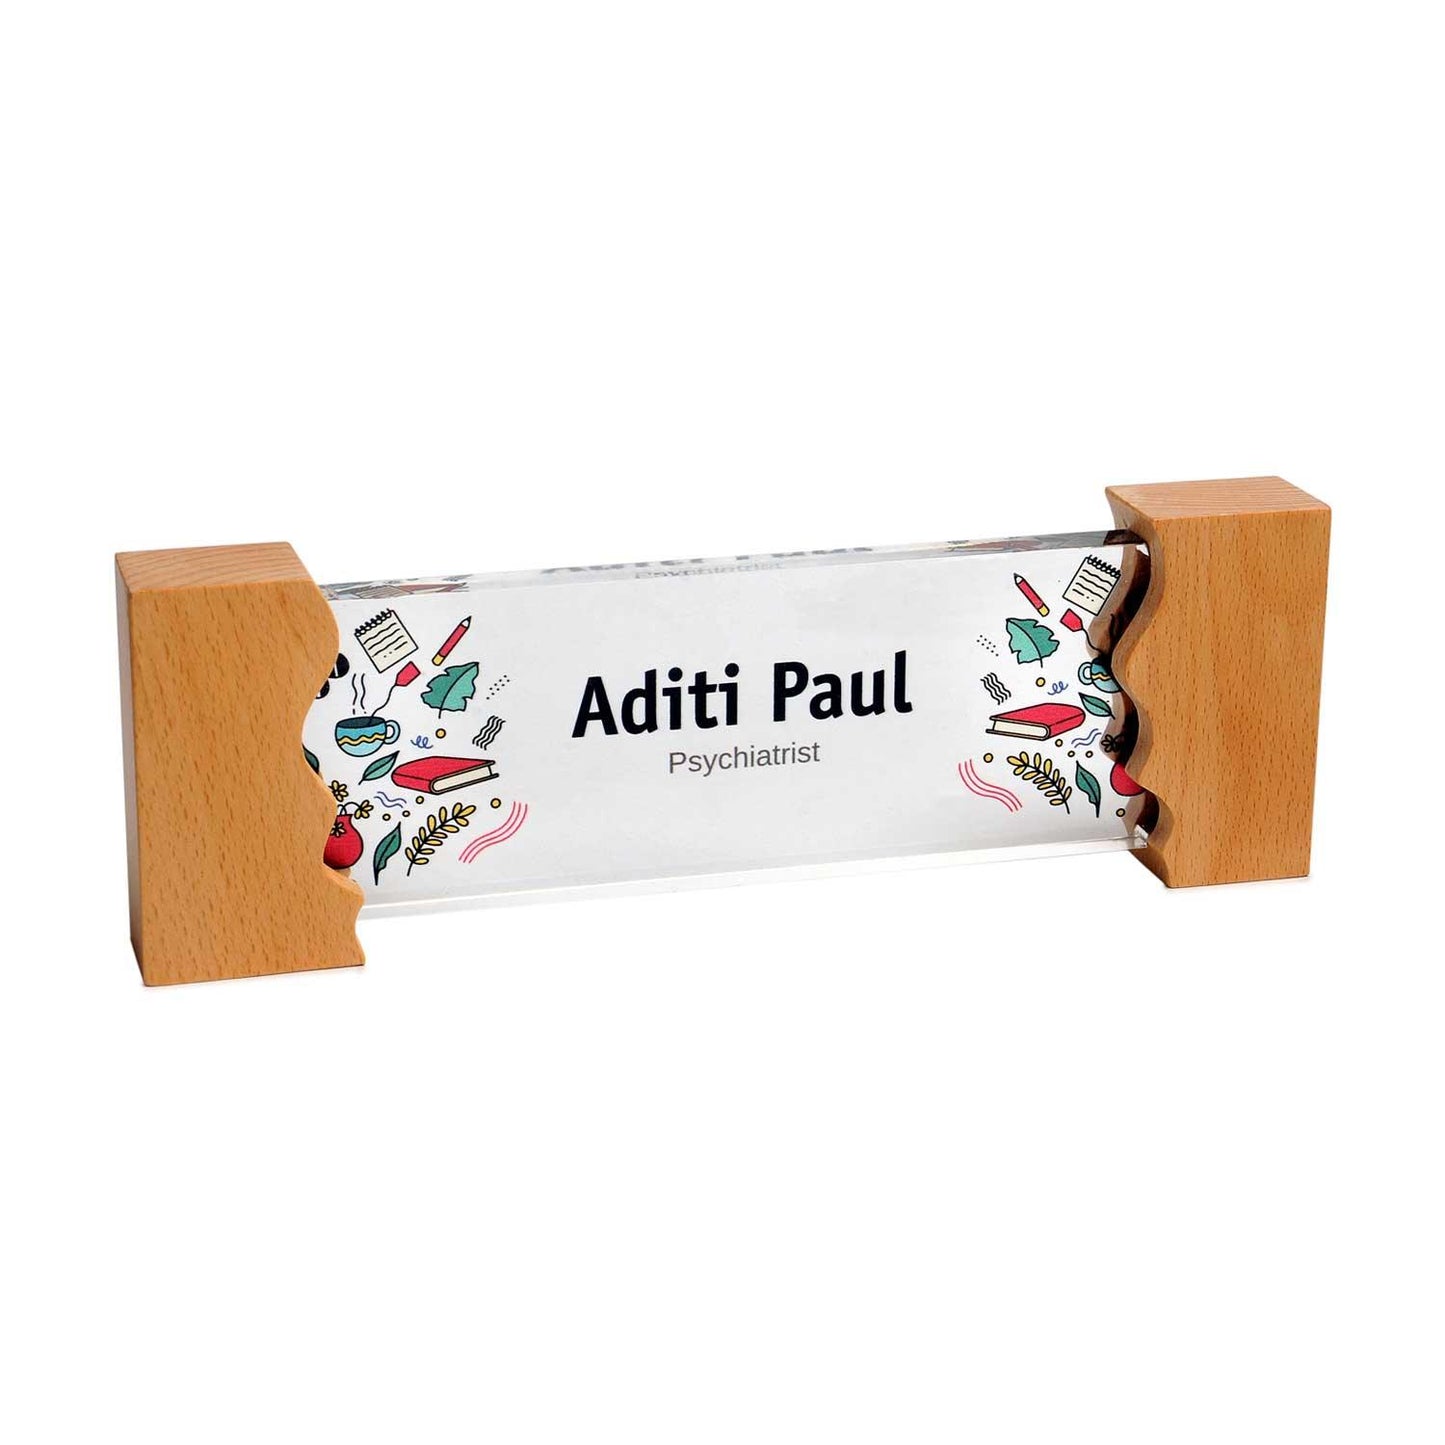 Stationery State Desk Name Plate with Wooden Stand - Housenama